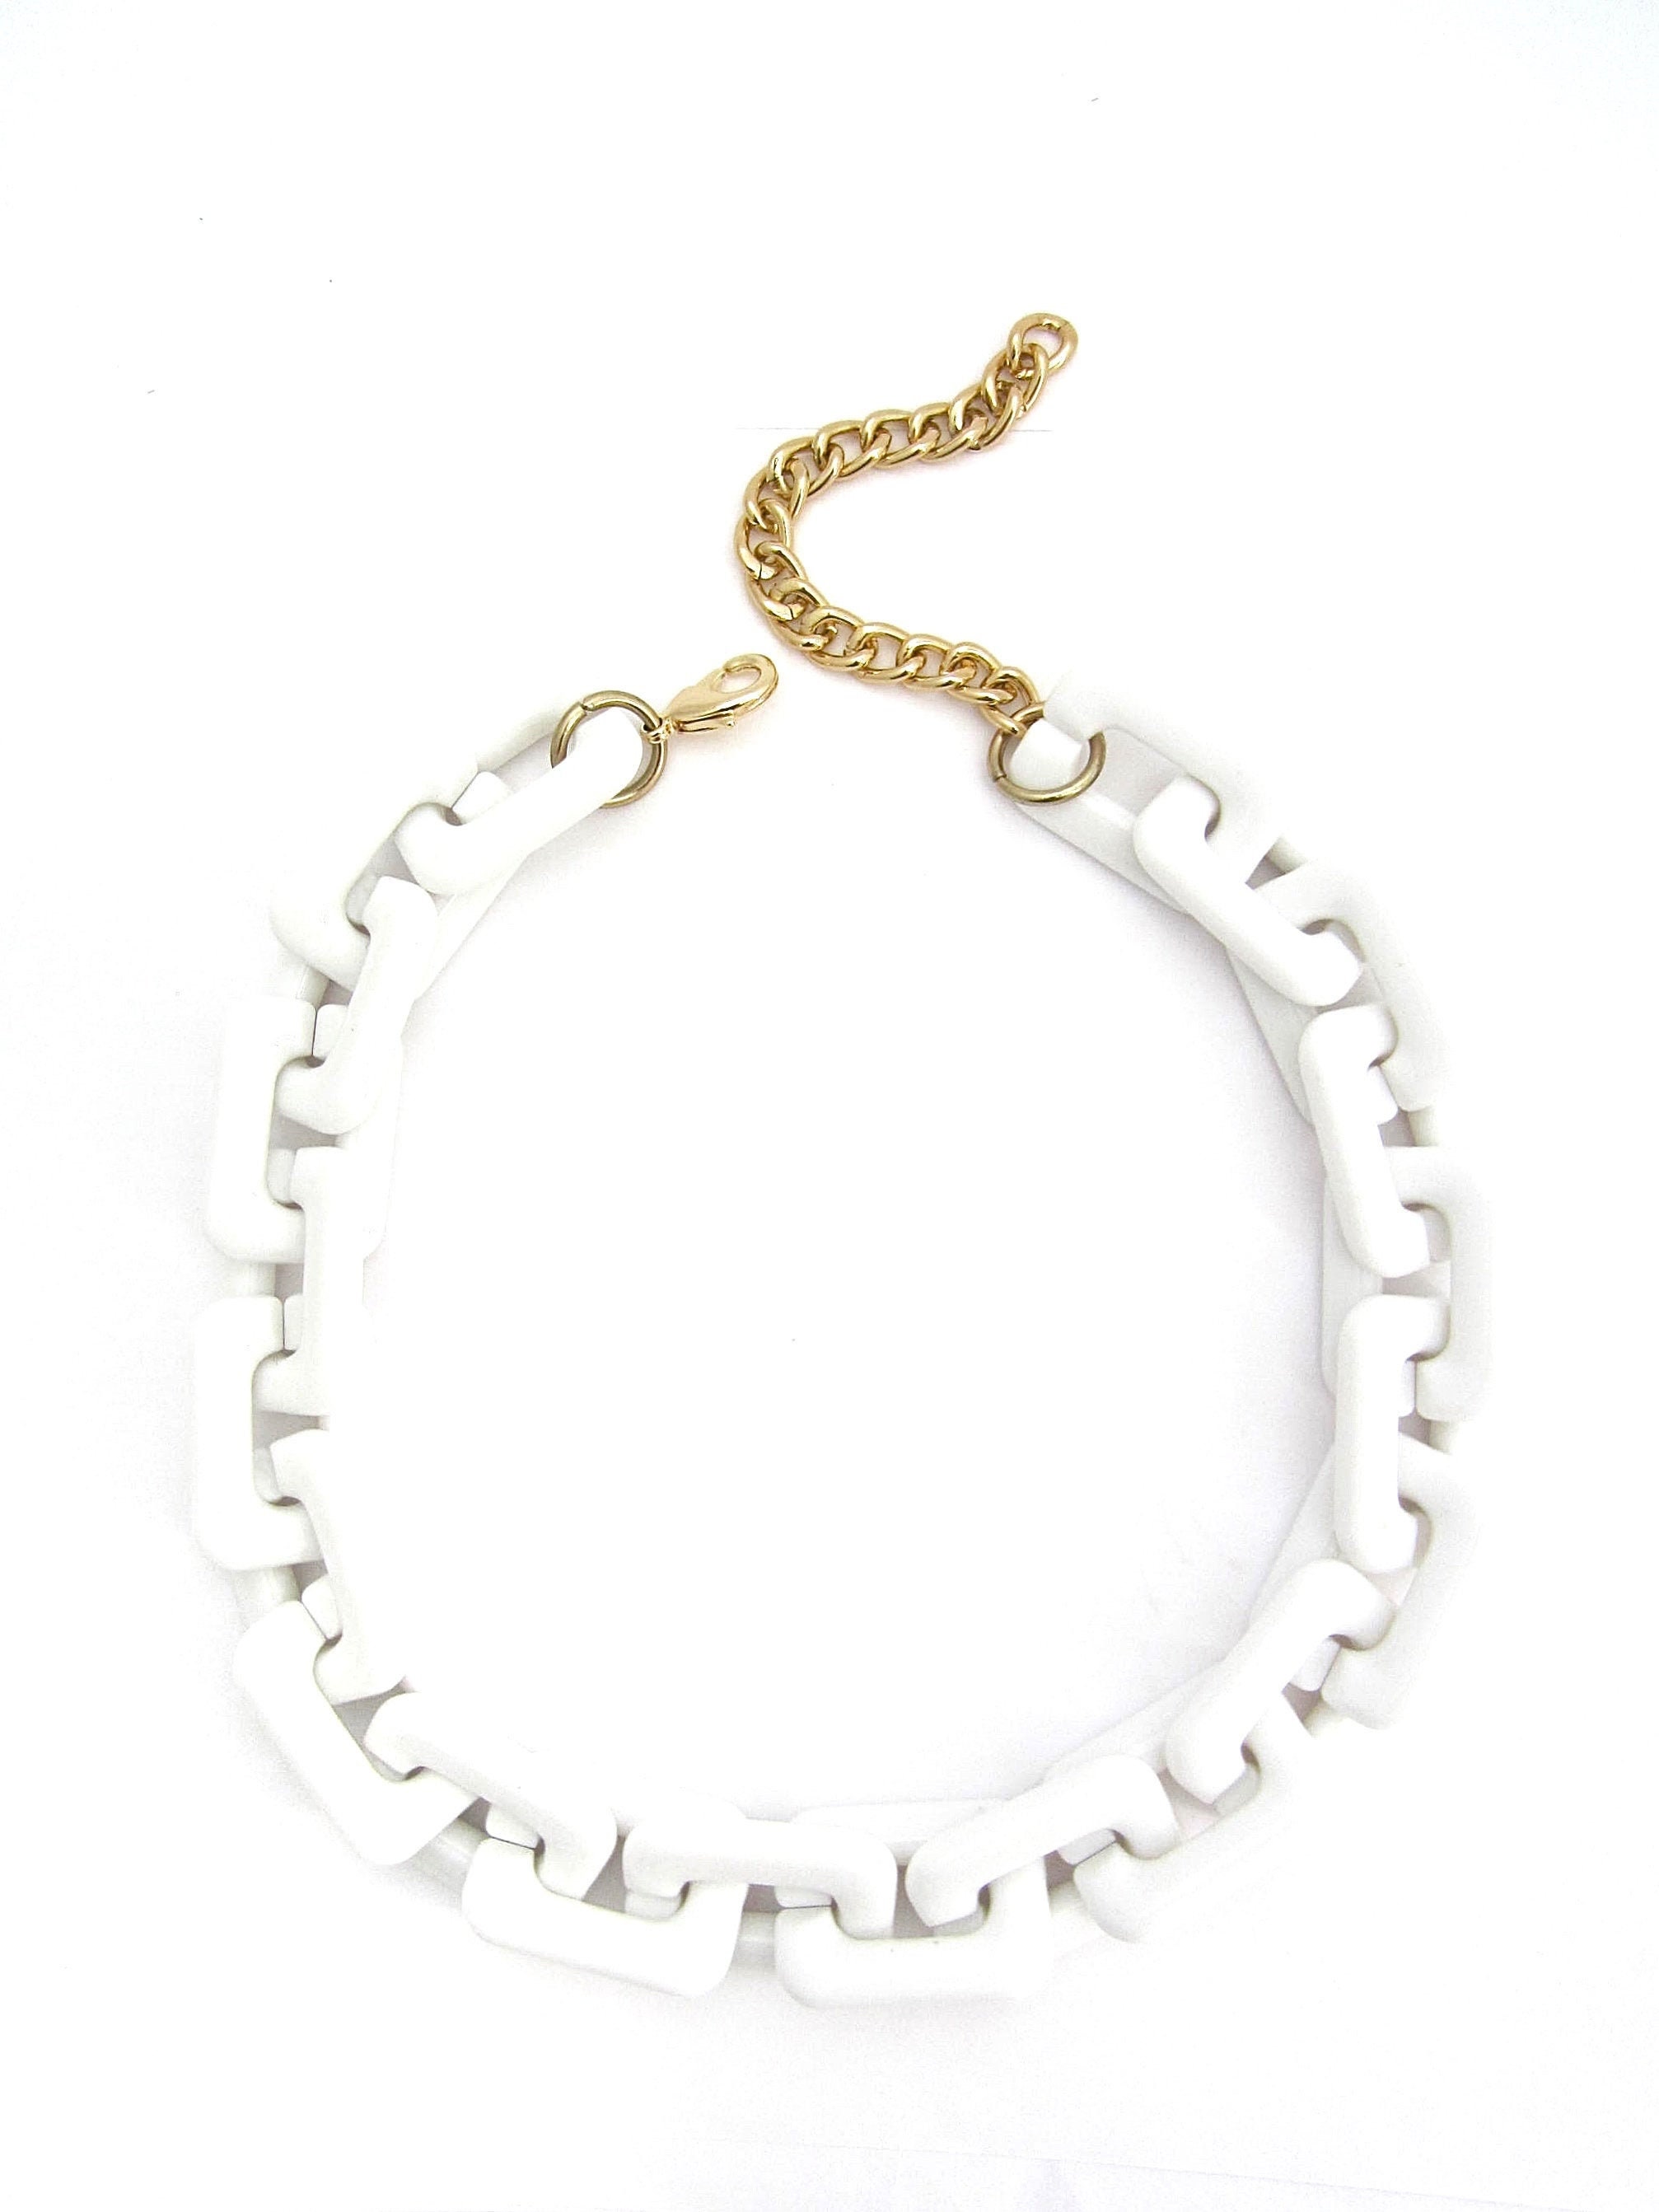 Chunky White Necklace, Resin Acrylic Link Chain, Geometric Statement Large Customized Jewelry